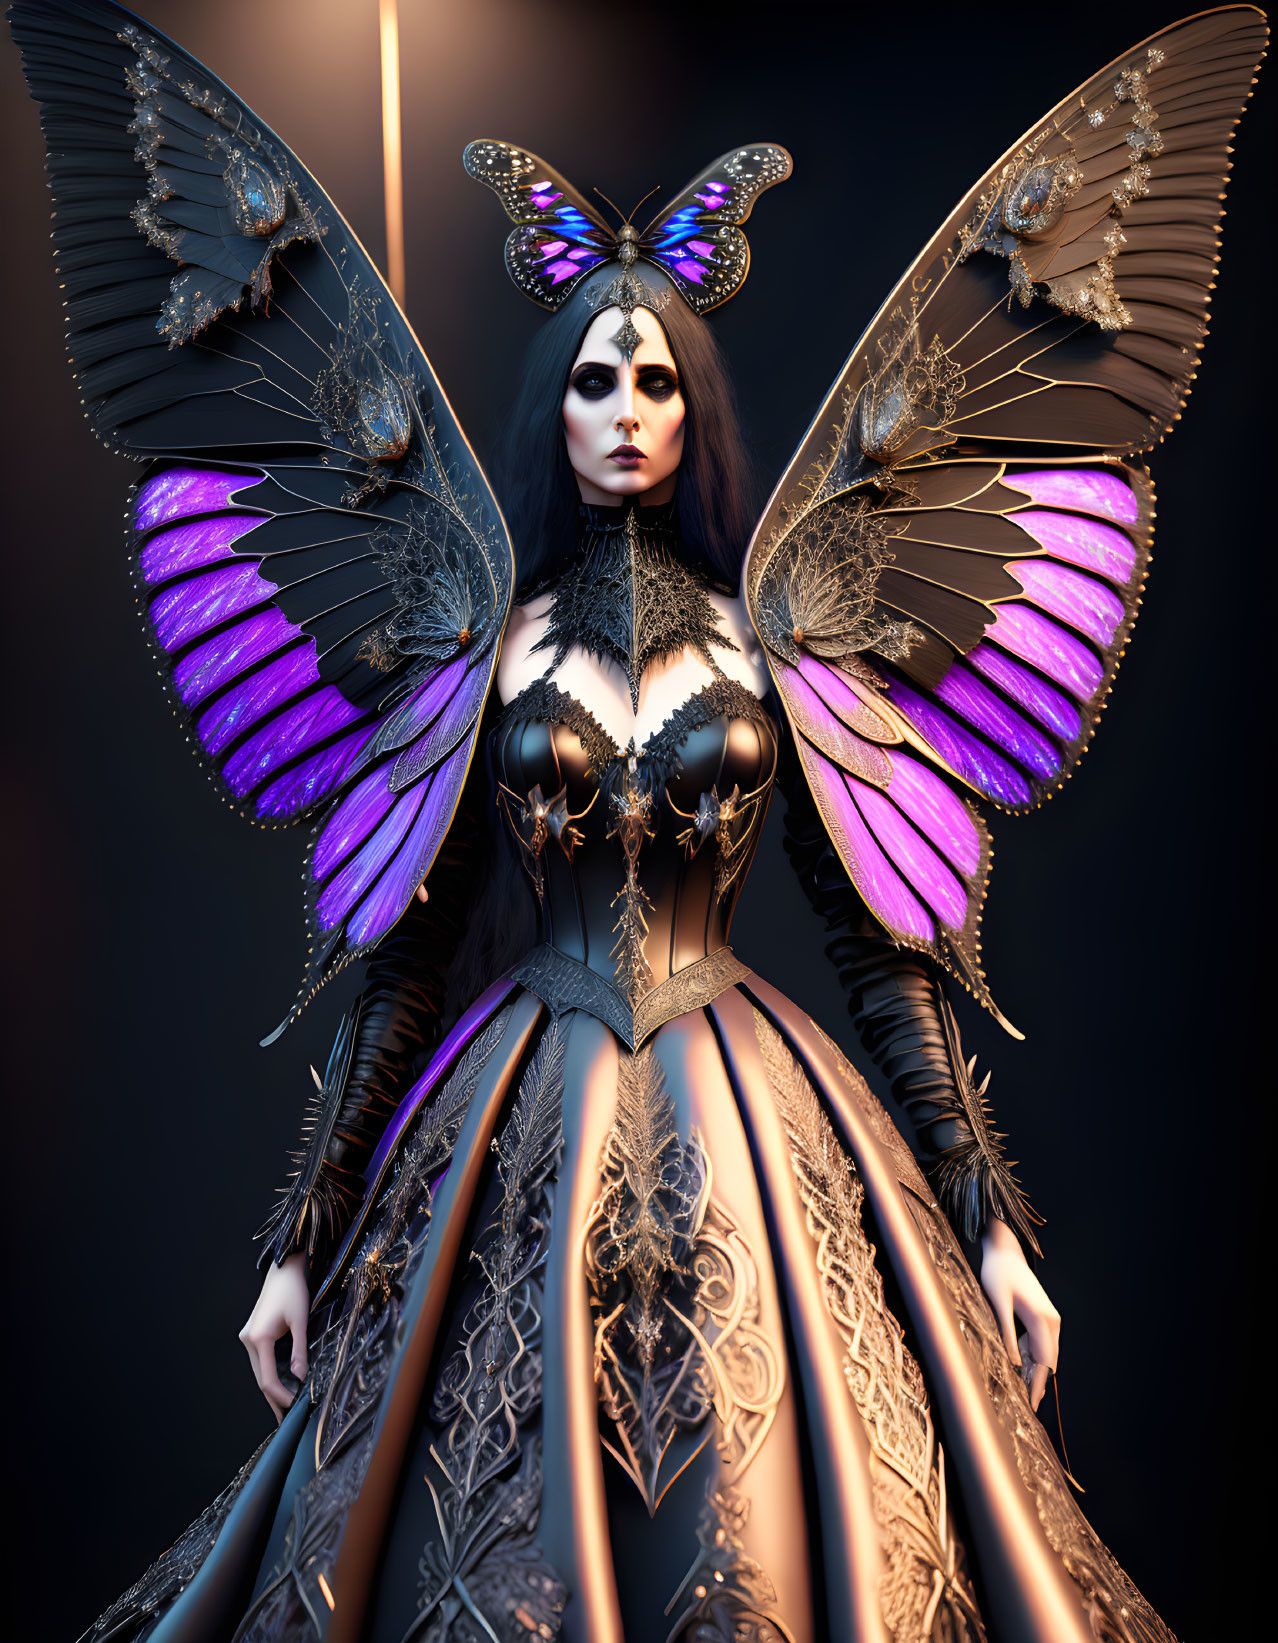 Fantastical figure with butterfly wings and vibrant purple hues